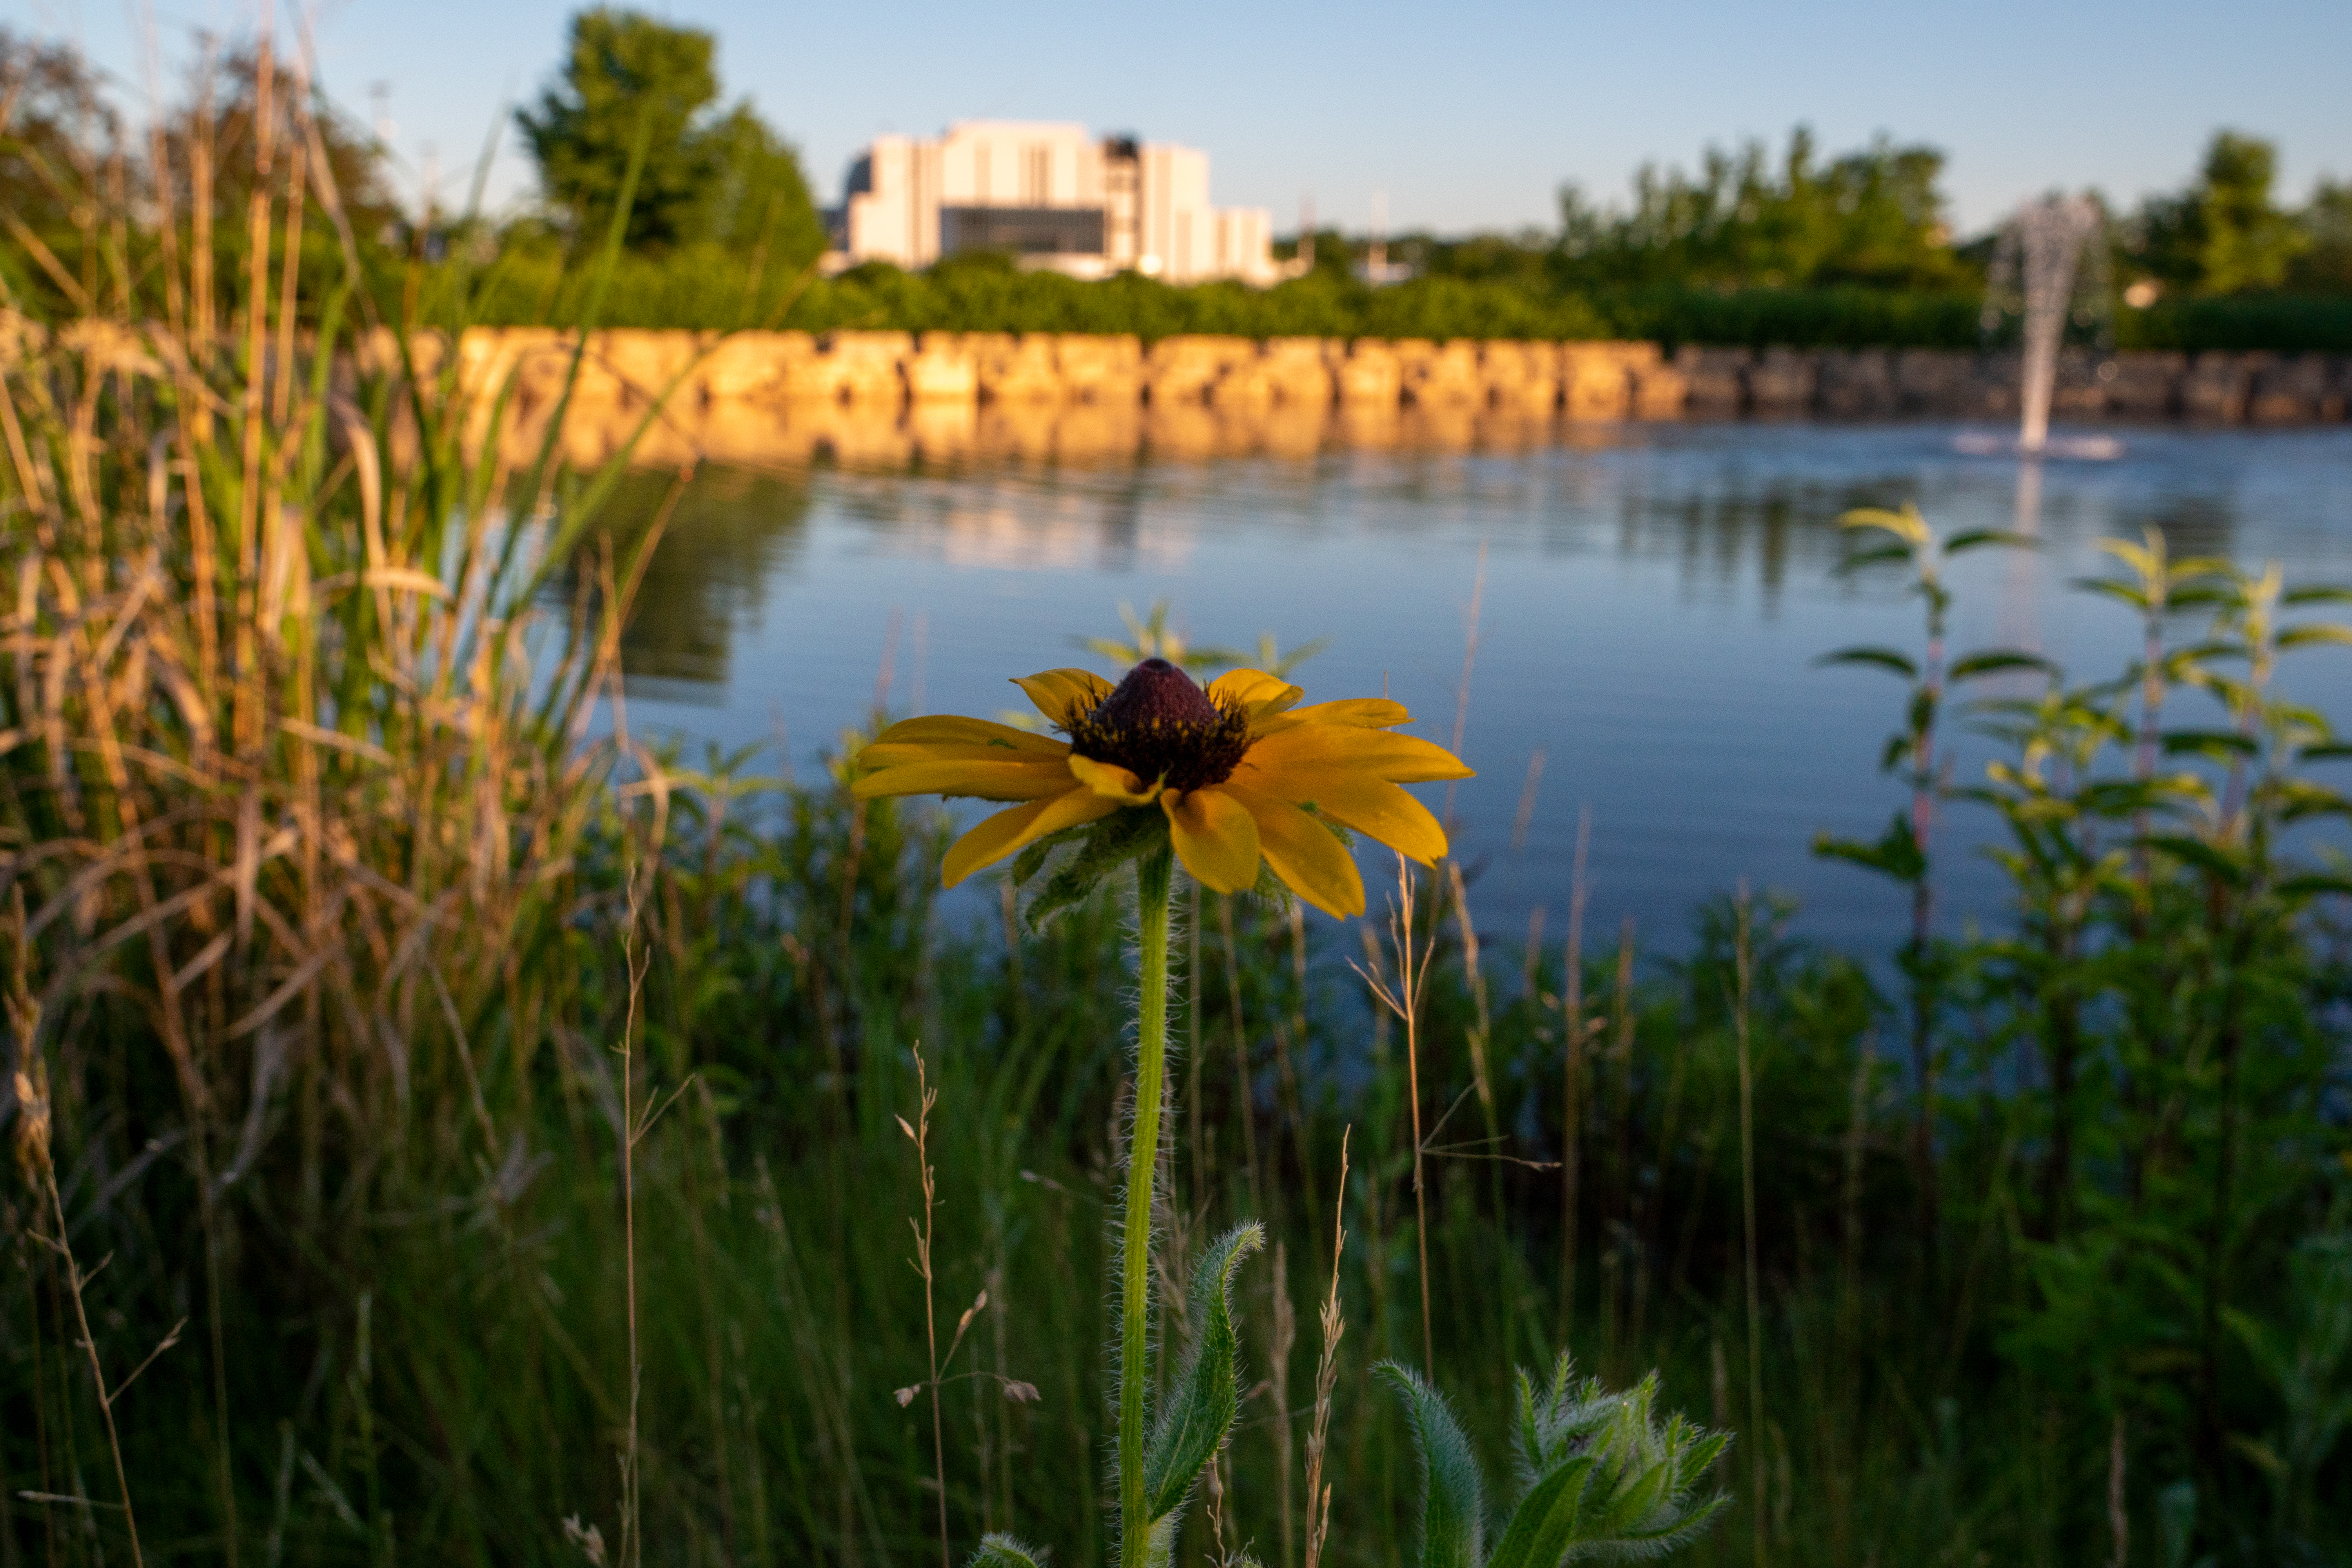 flower in focus with JJC Main Campus, water and plants in background